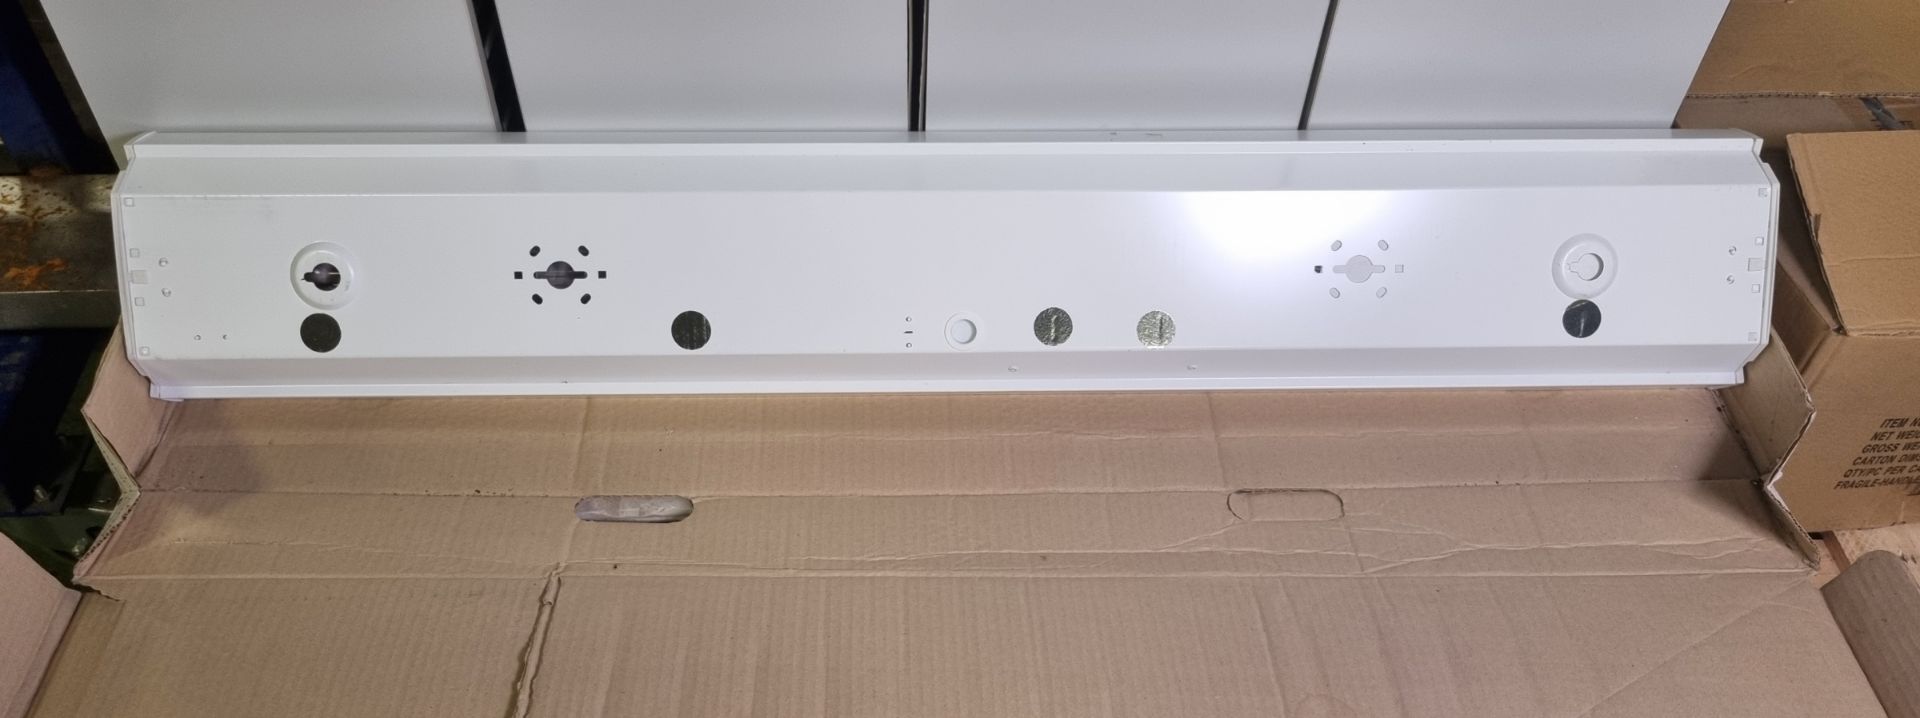 3x Thorn T8 surface mount lights - L 1200mm - Image 5 of 5